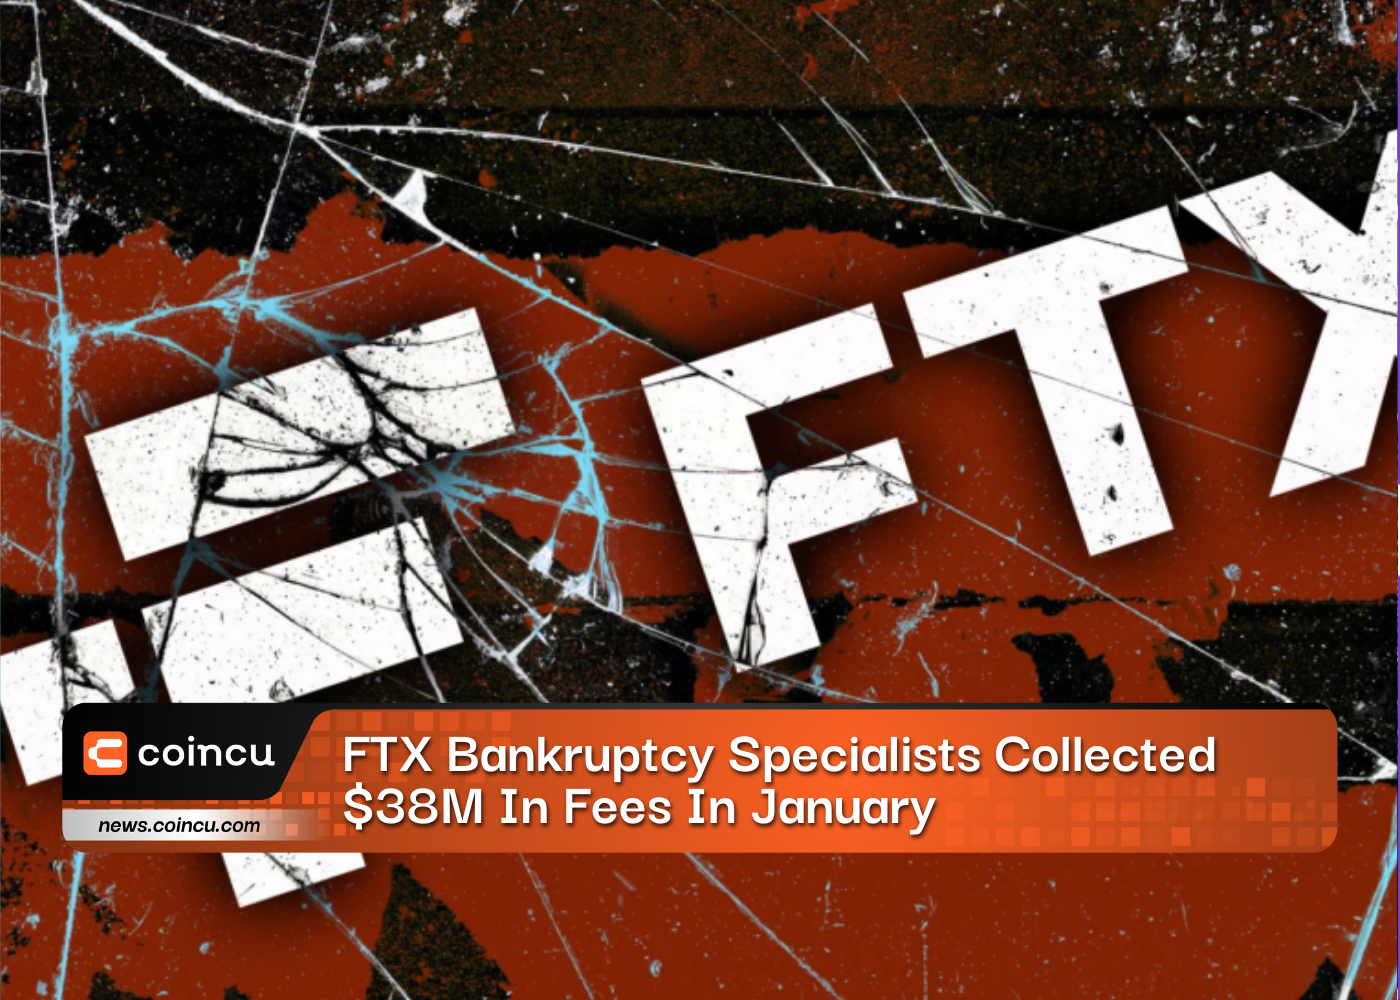 FTX Bankruptcy Specialists Collected $38M In Fees In January